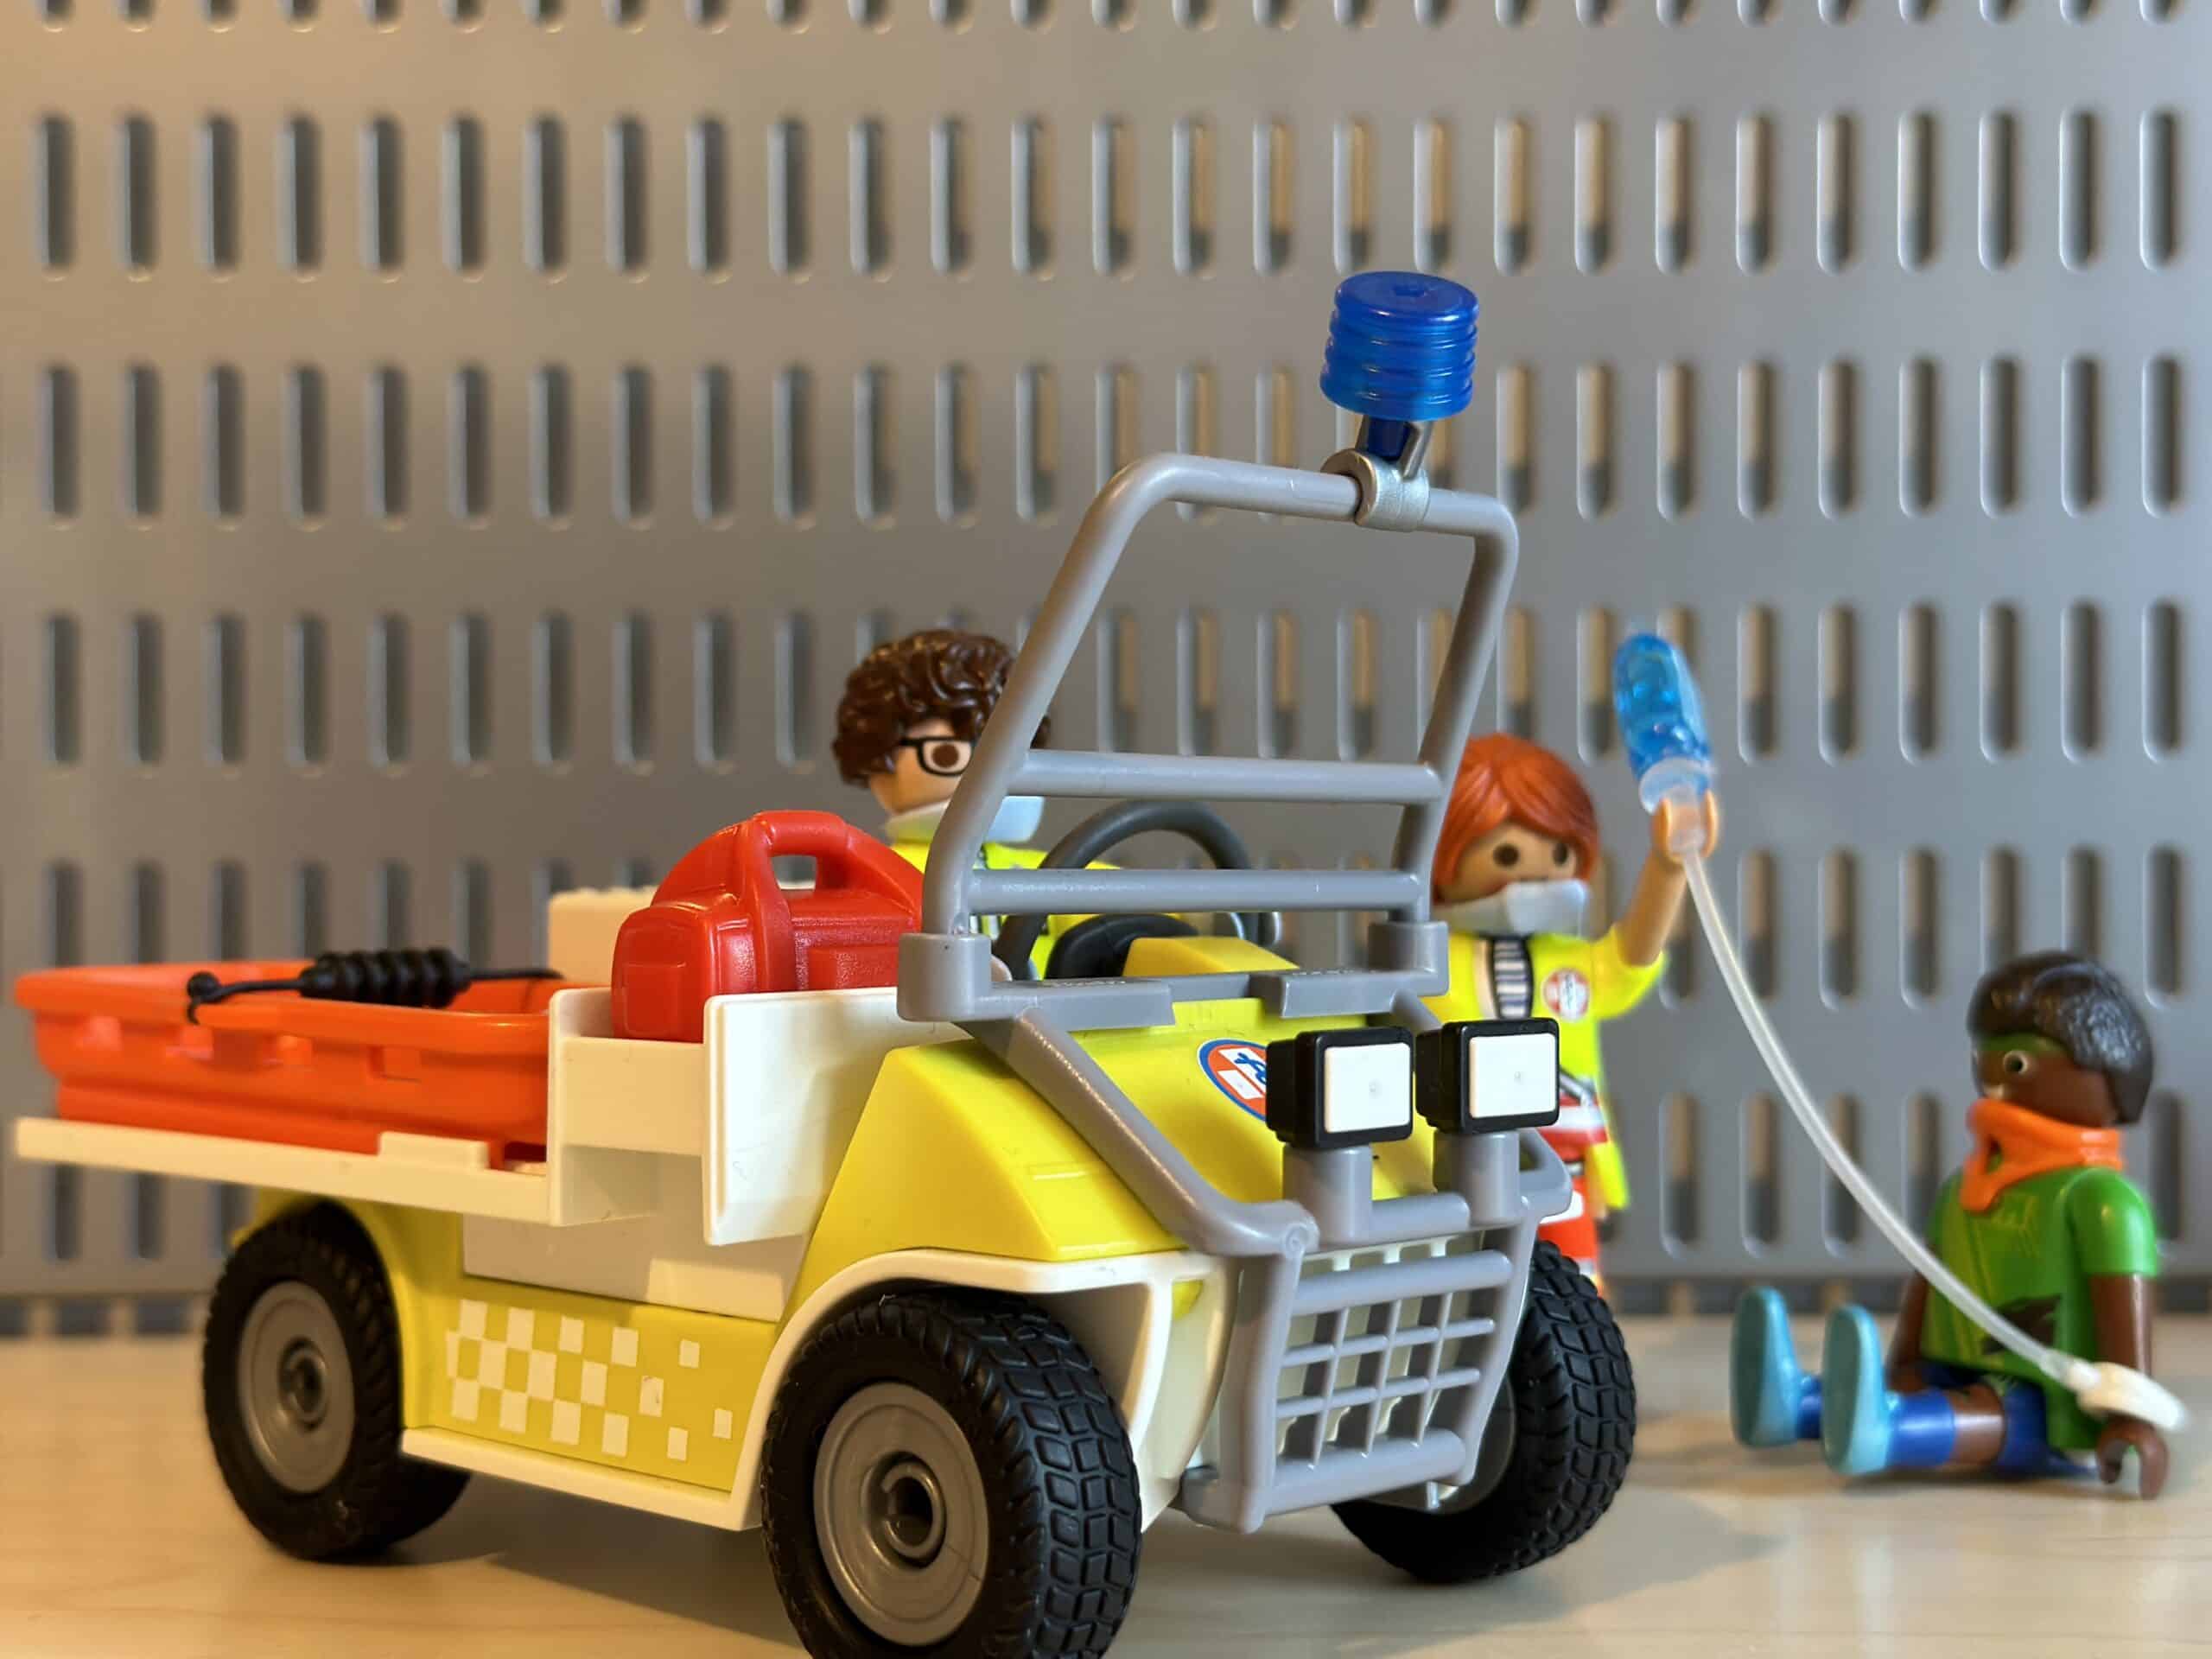 Holiday Gift: Lego, Playmobil Ambulance Sets Contain Cyclist